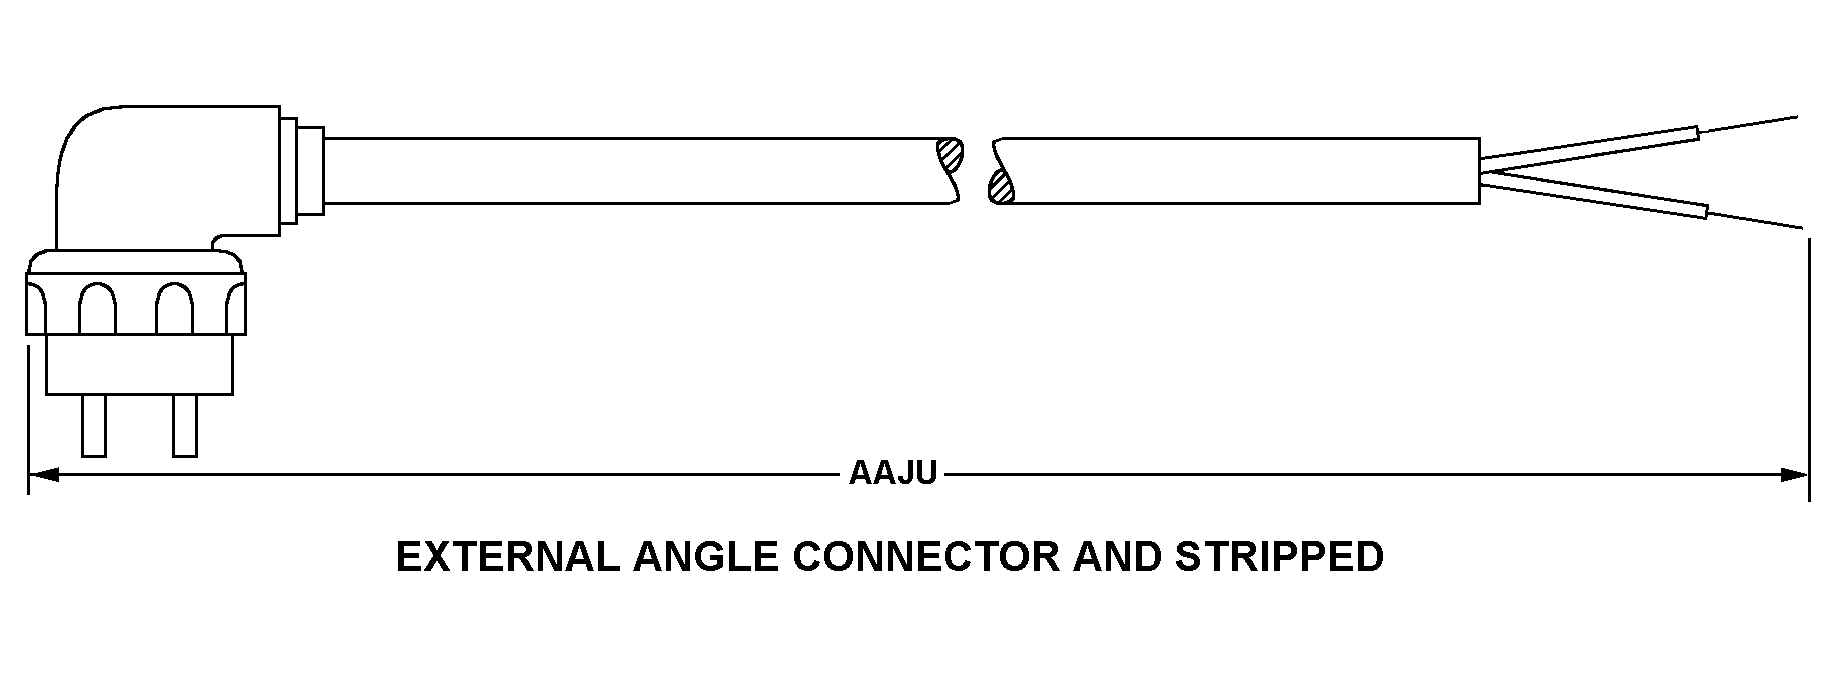 EXTERNAL ANGLE CONNECTOR AND STRIPPED style nsn 5995-01-190-4774